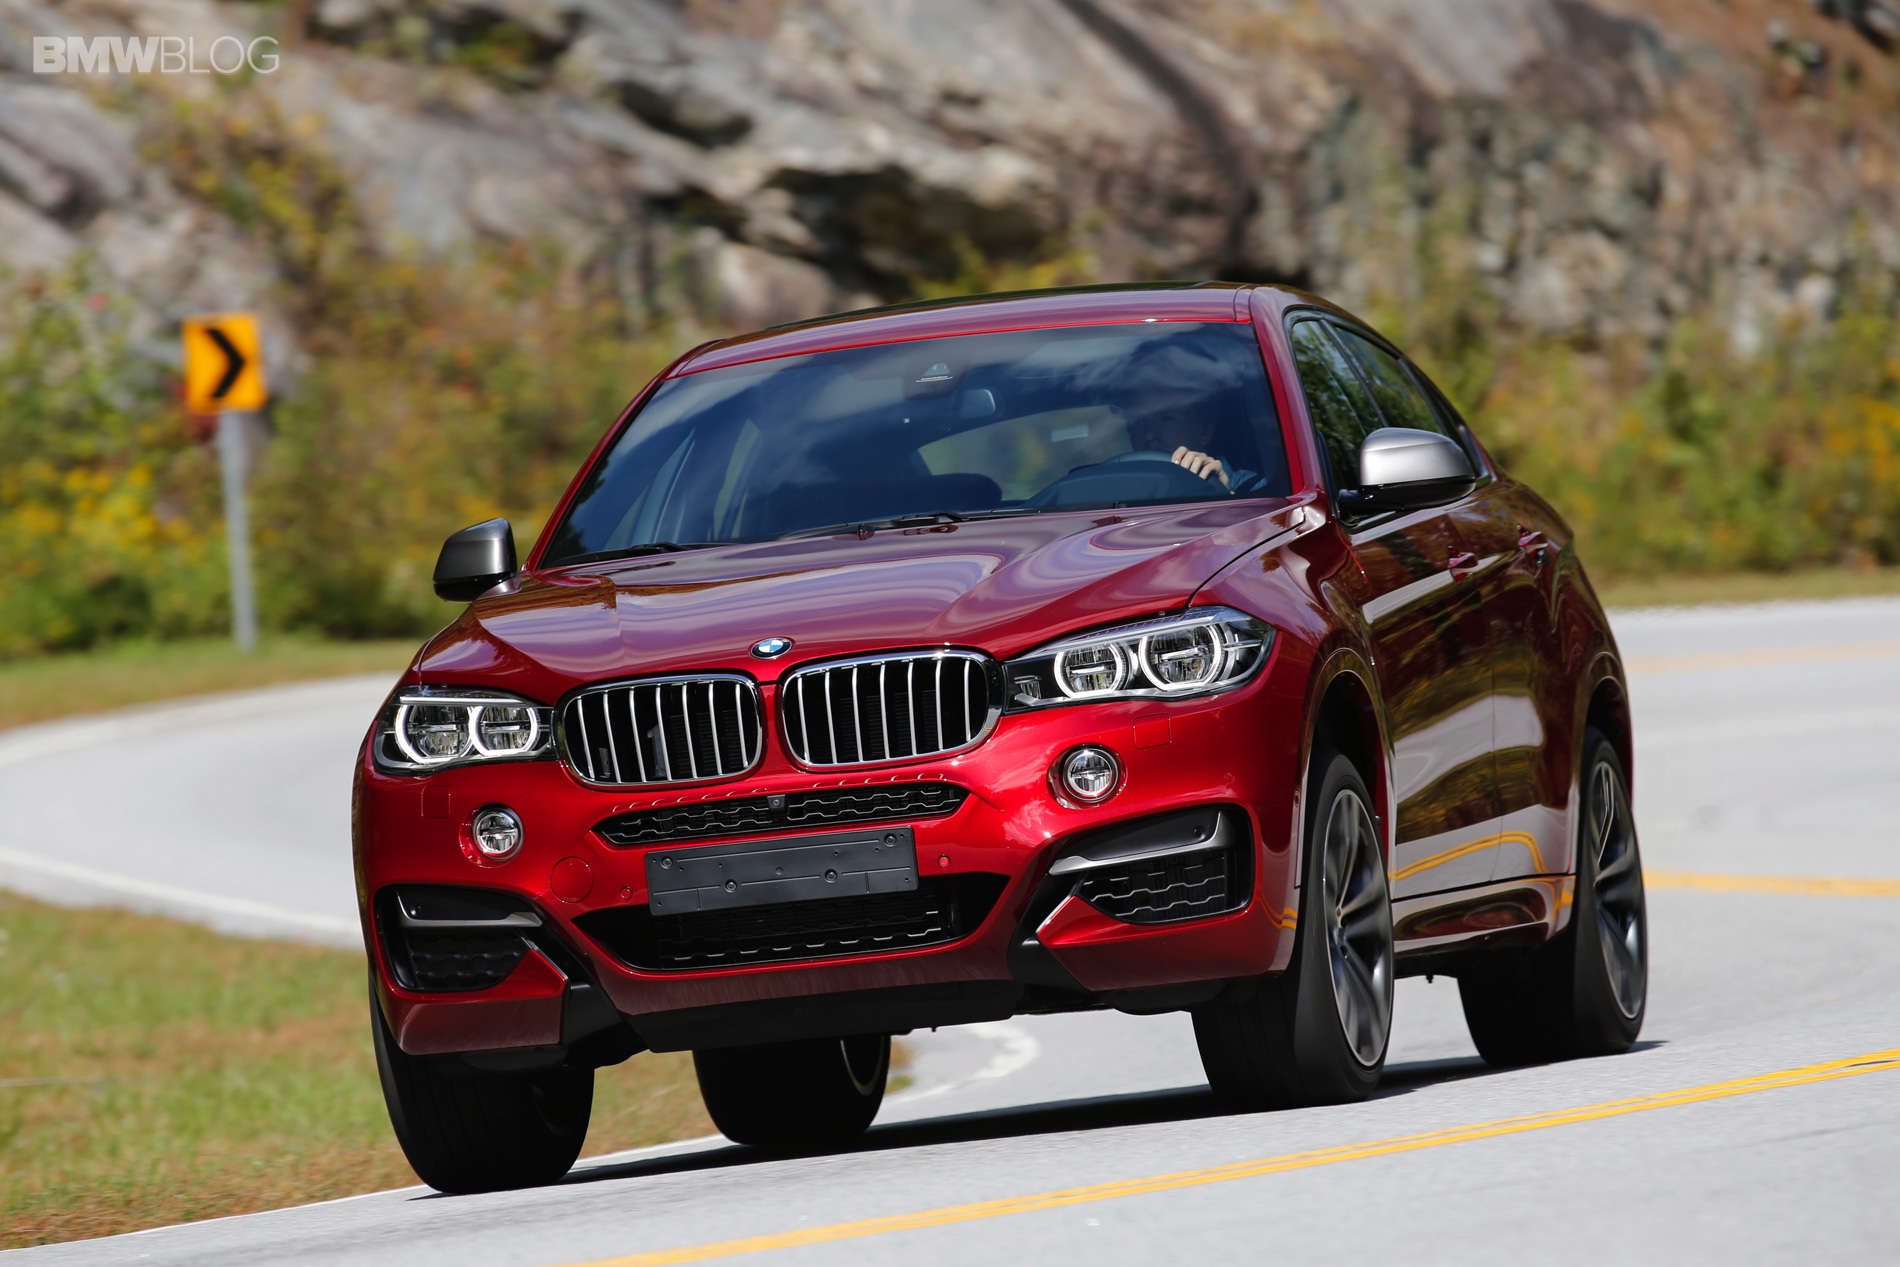 Top gear review of bmw x6 #7